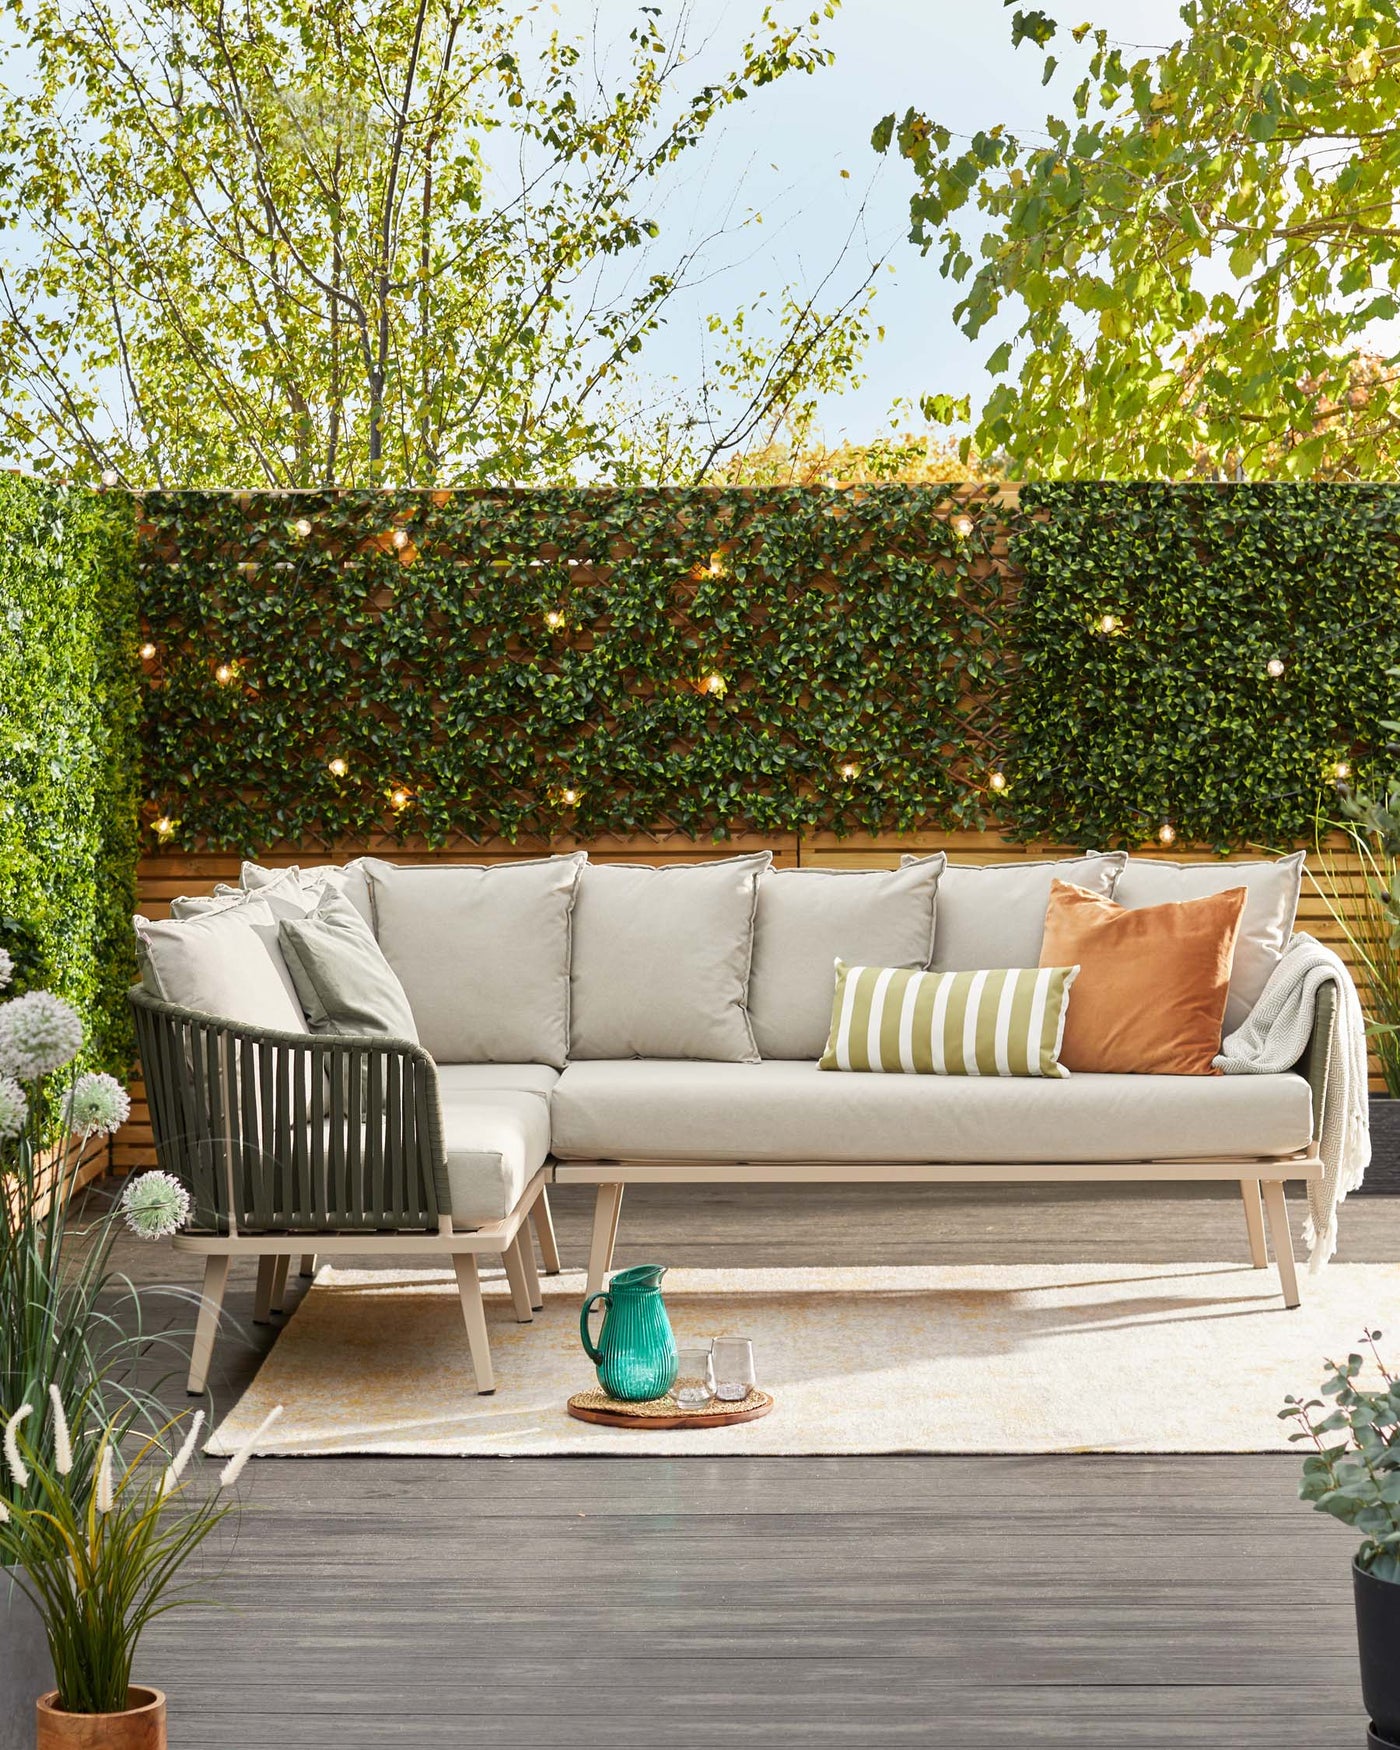 Outdoor corner sofa with light beige cushions on a beige minimalist frame, accompanied by an assortment of throw pillows in beige, green stripes, and copper tones. A textured beige area rug under the sofa, with a glass pitcher and glasses set on a small round tray placed on the rug.